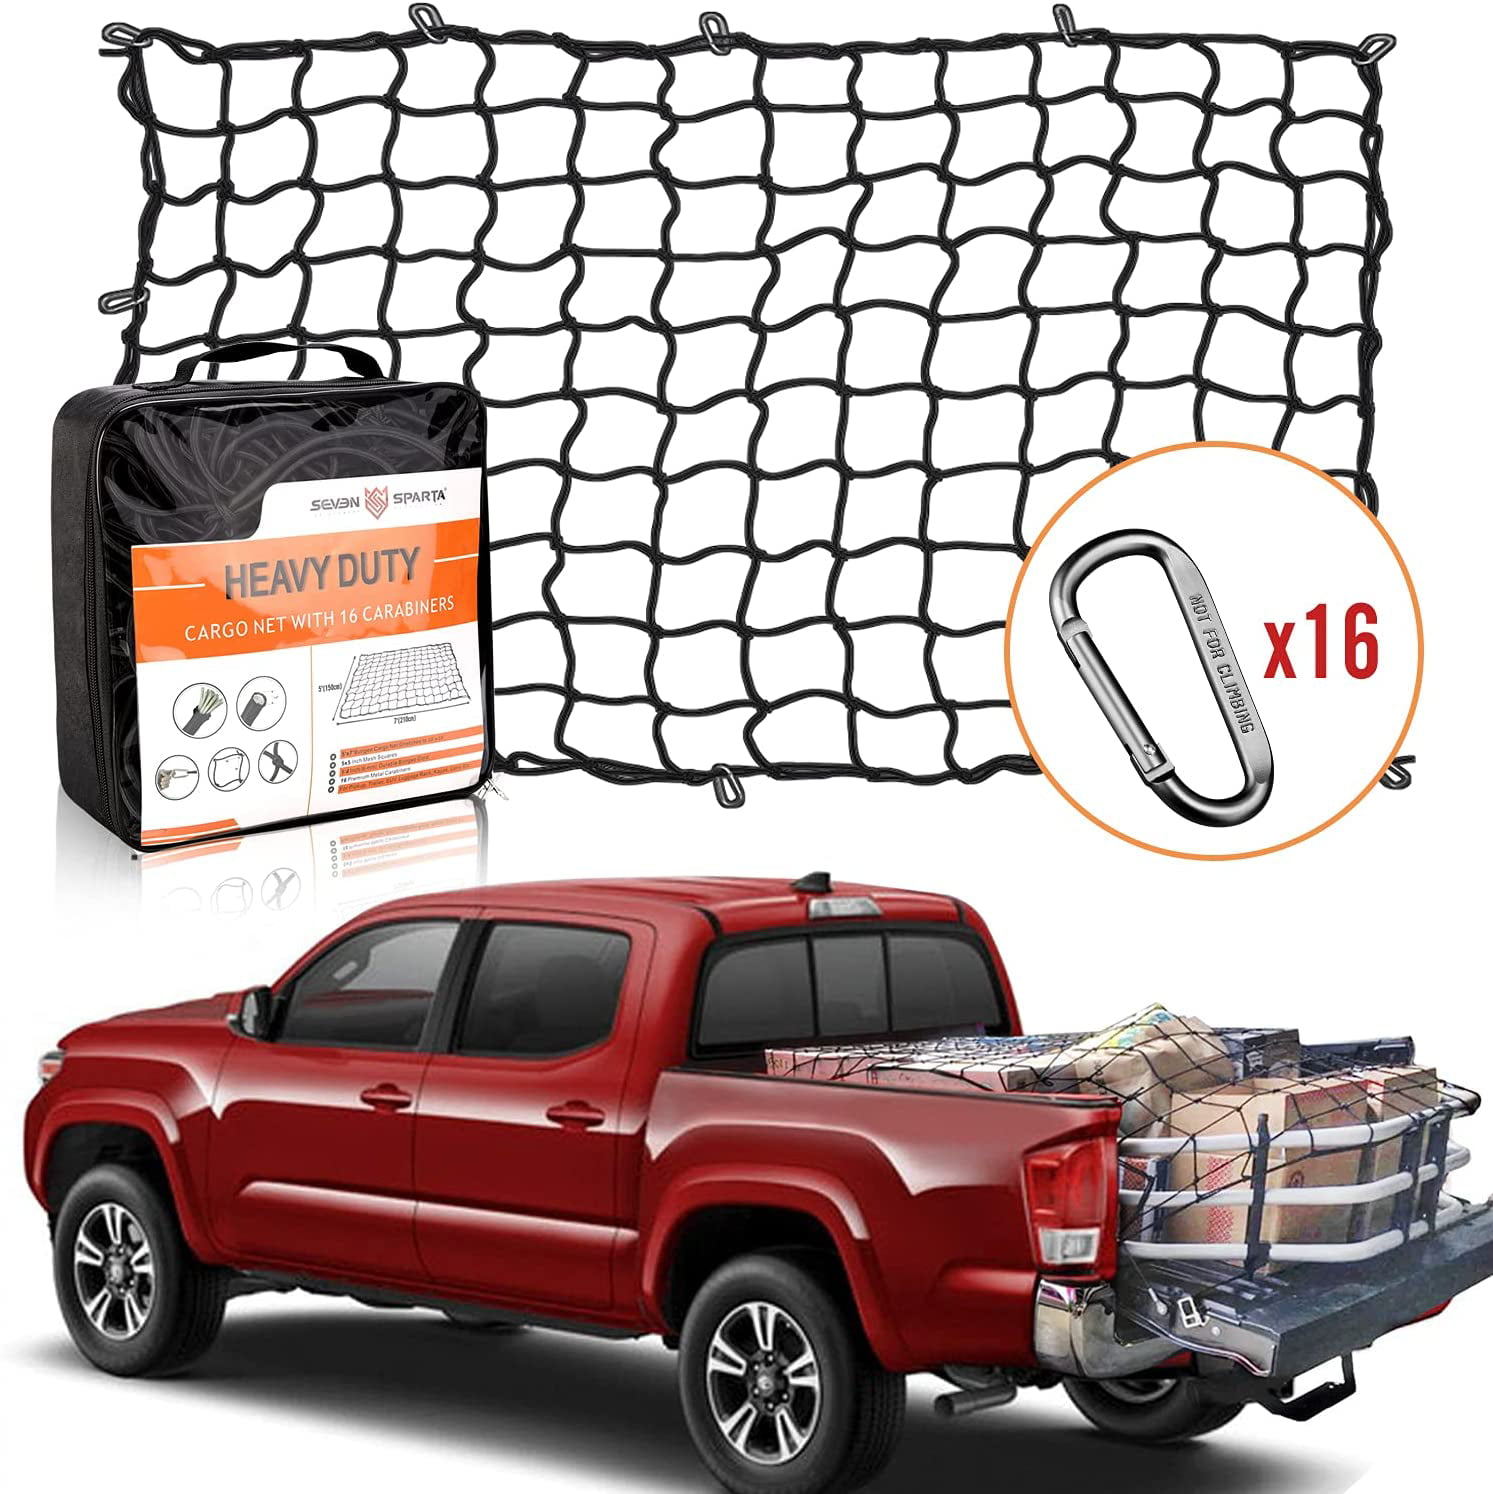 Trunk 3 x 4 Bungee Cargo Net Stretches to 6 x 8 with 12 Bonus D Clip Carabiners for Oversized Rooftop Cargo Rack Trailer SUV Universal Car Rear Organizer Net Small Trucks 